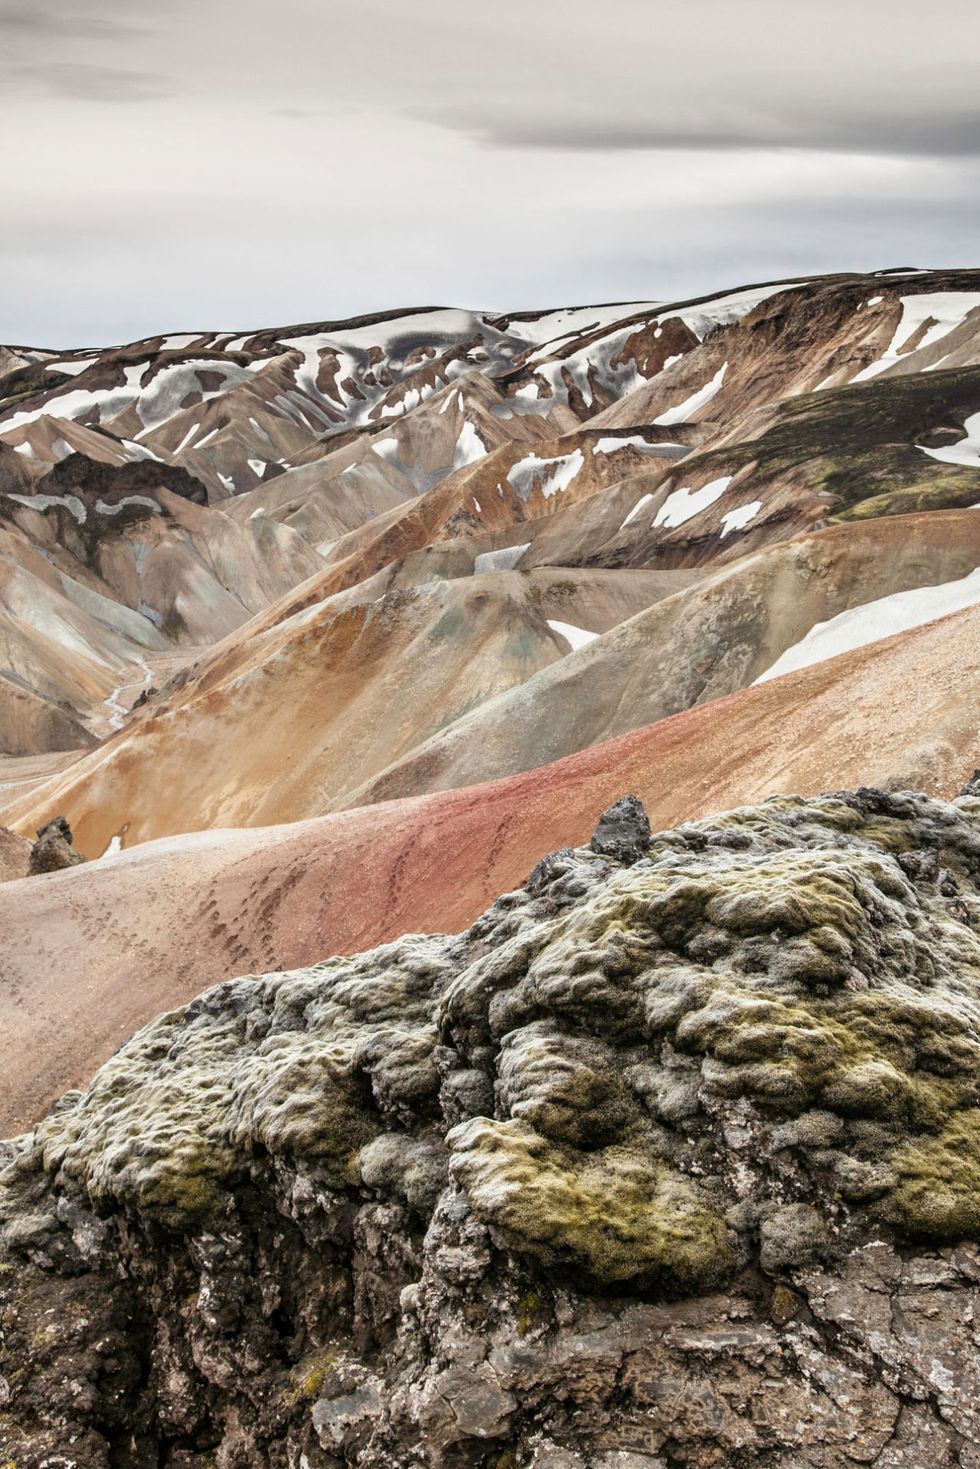 <p>Iceland's interior is largely uninhabited and difficult to get to. But if you can access the right kind of car to get through the rough terrain, the otherwordly landscapes you'll see at Landmannalaugar—including multicolored rhyolite mountains—will be a highlight of your trip.
</p><p><br></p>